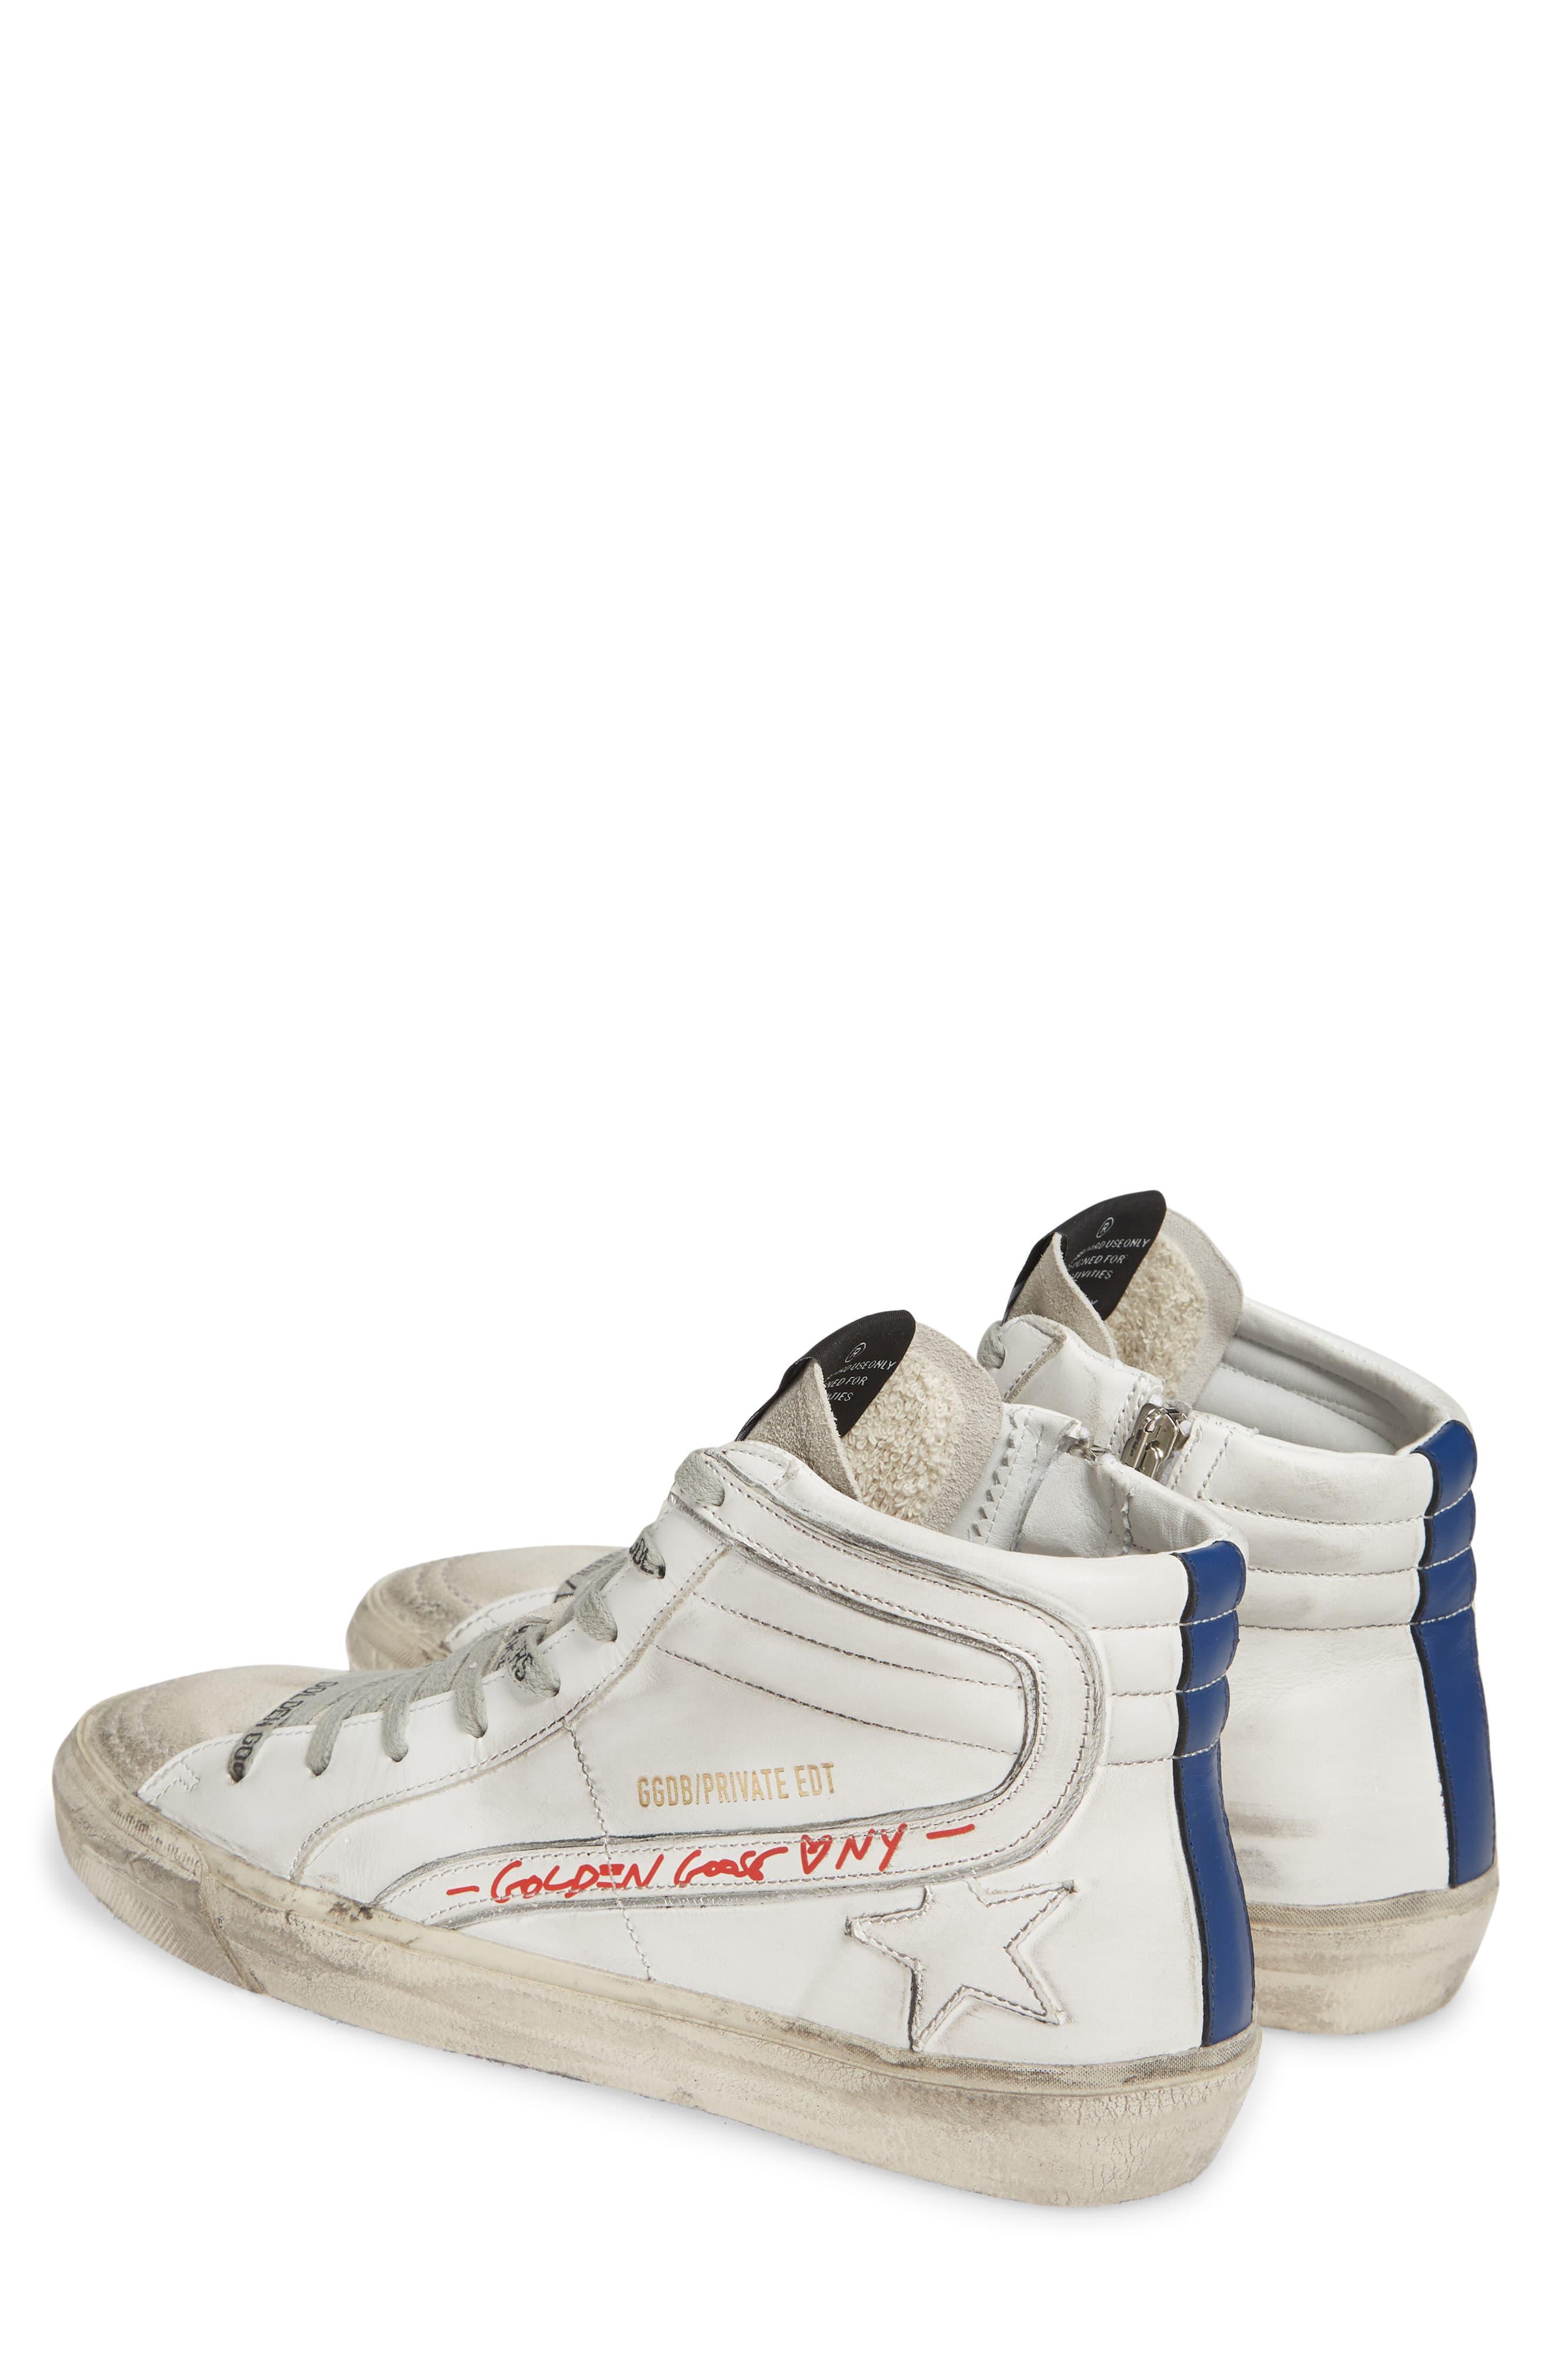 Golden Goose Deluxe Brand Slide Nyc Graphic High Top Sneaker in White - Lyst